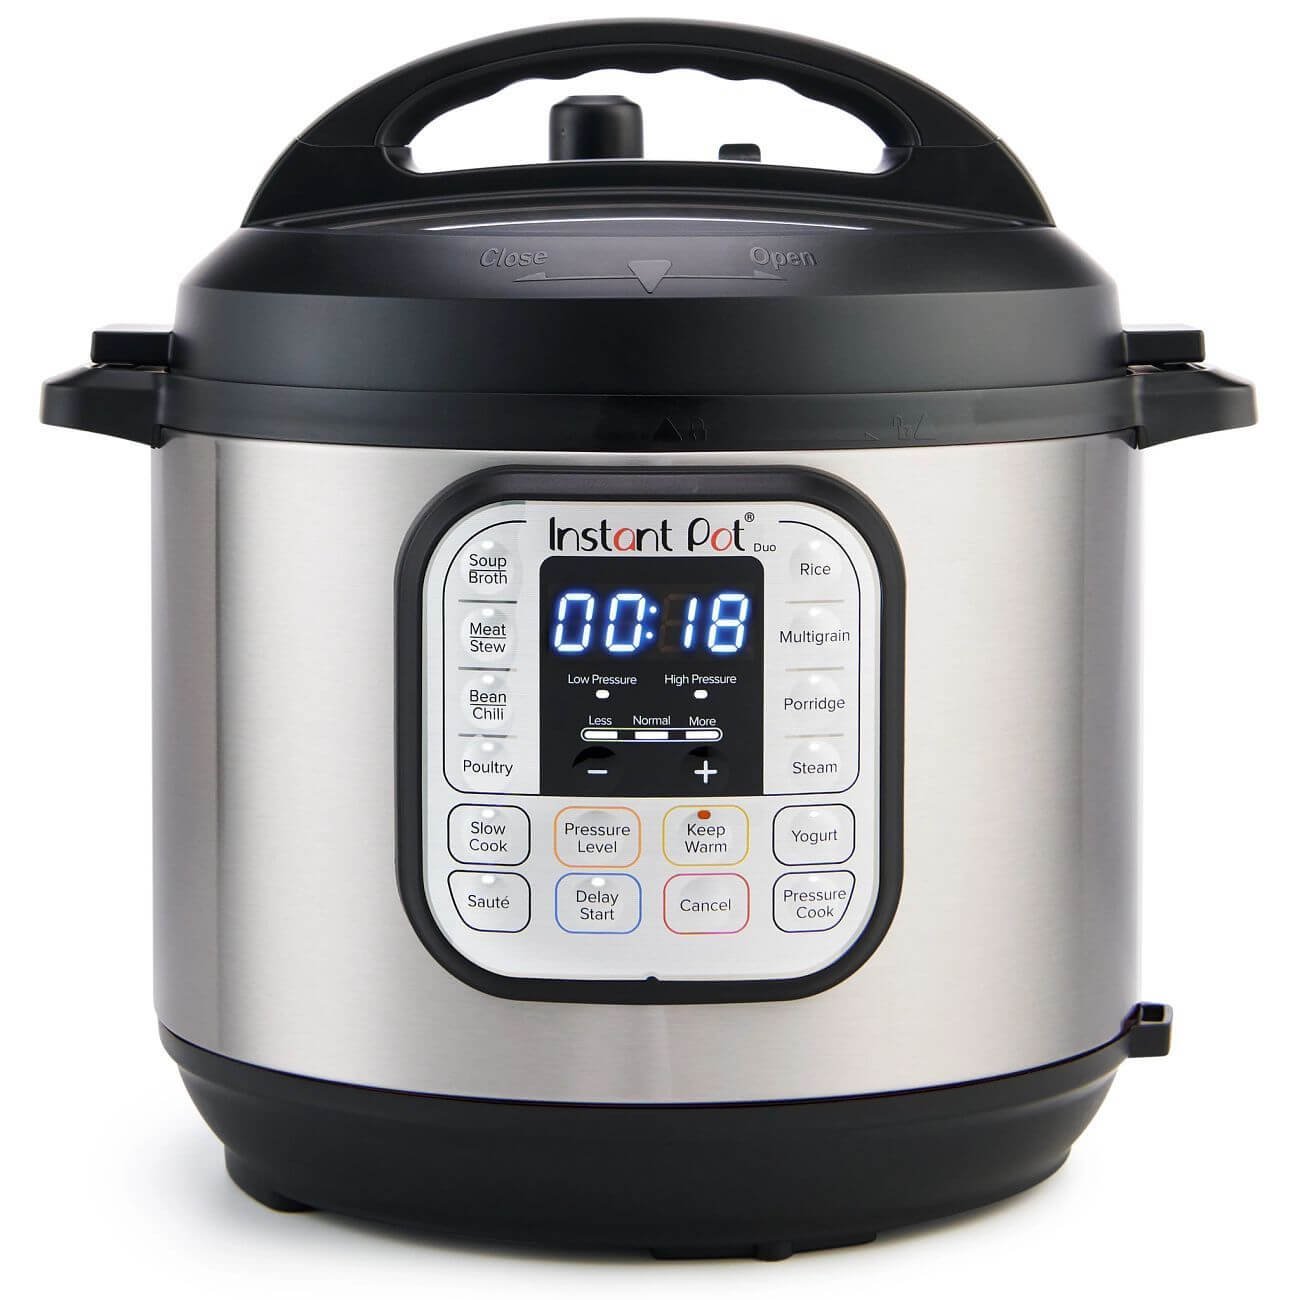 The Best Electric Pressure Cookers For Lightning-Fast Dinners